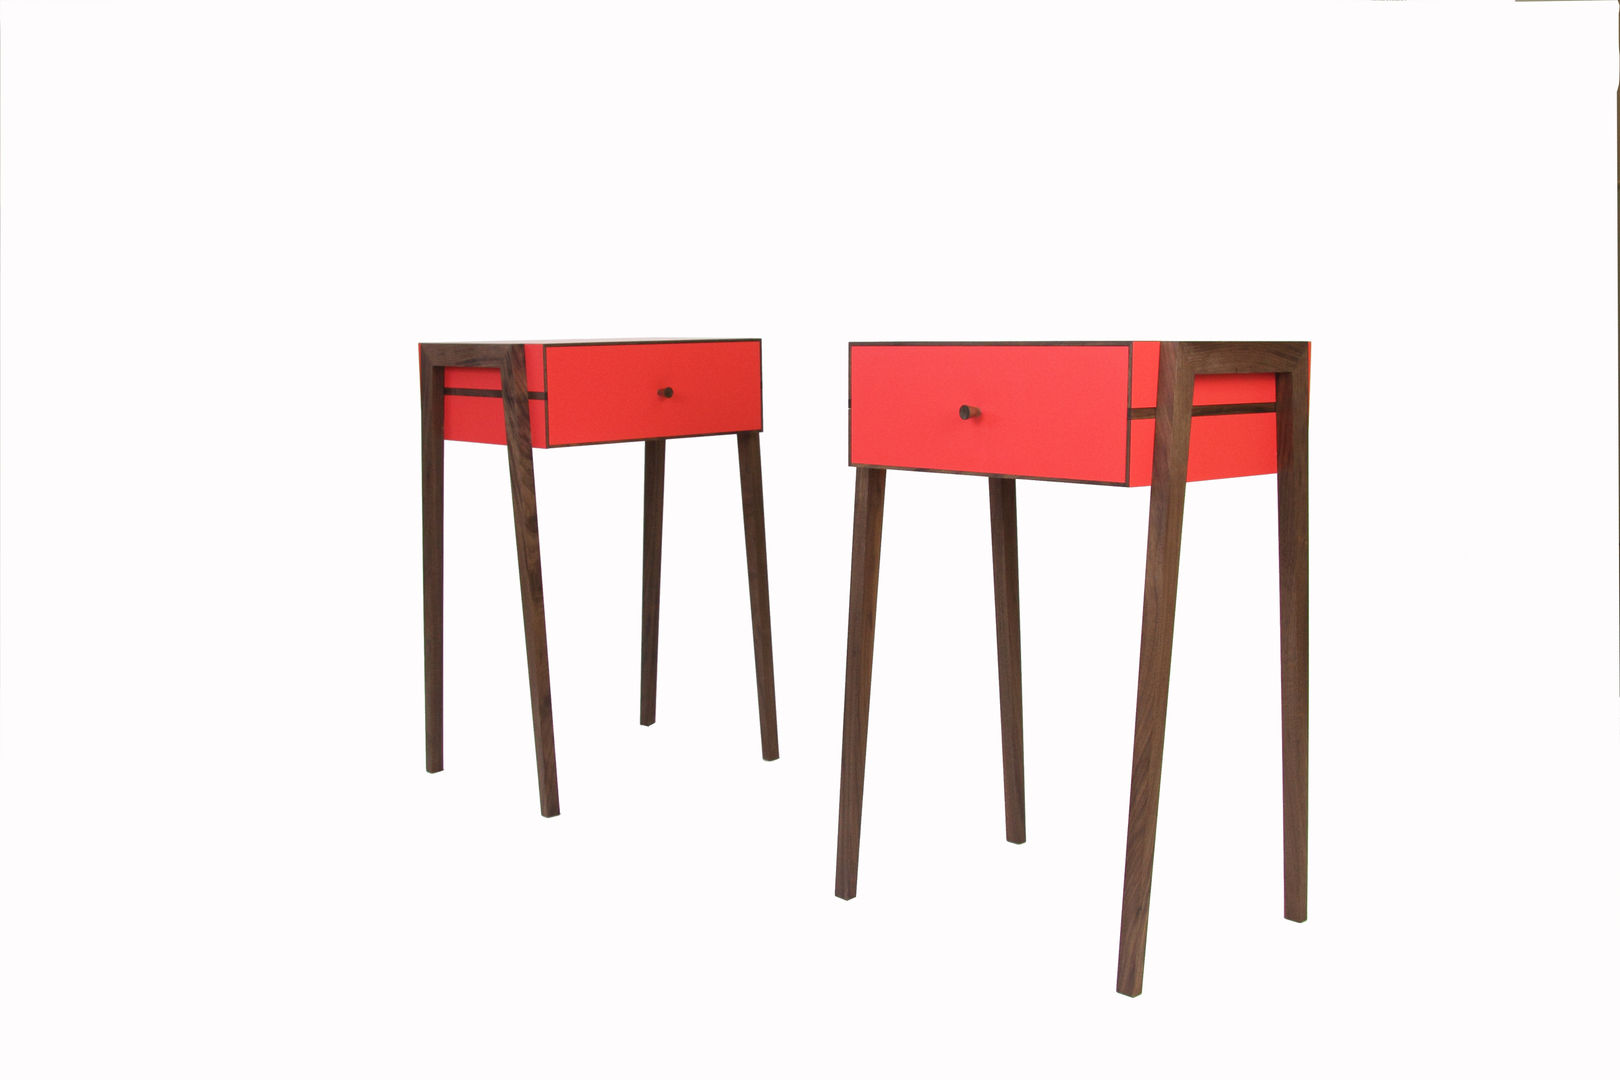 Animate Bedside Table in Red Formica and Walnut Young & Norgate ห้องนอน โต๊ะหัวเตียง